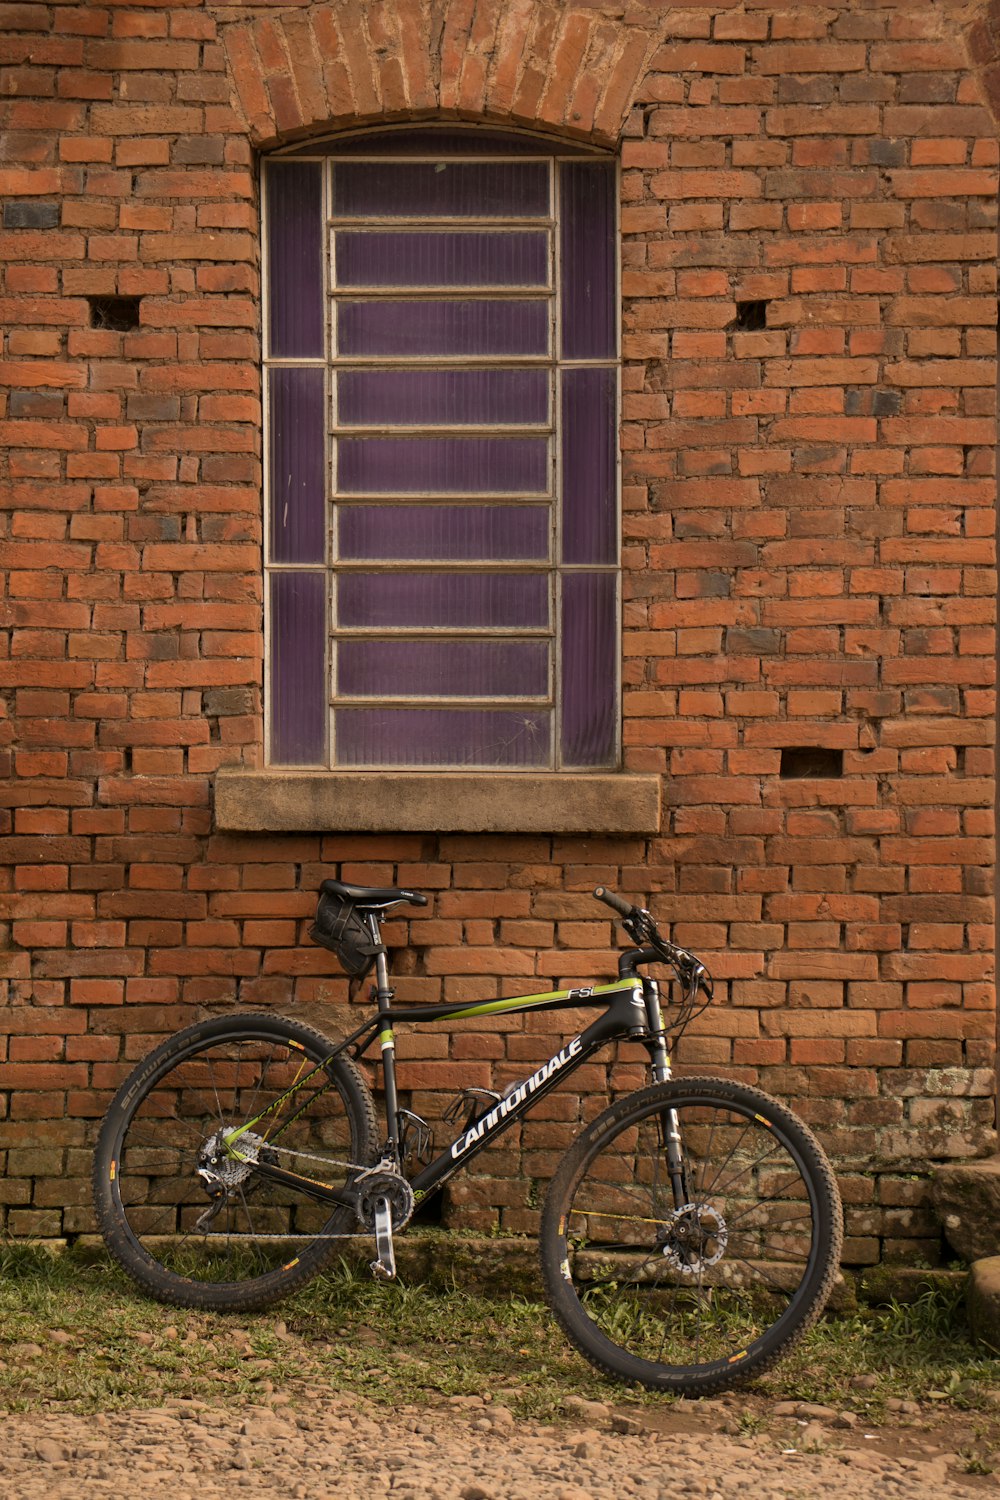 a bike parked in front of a brick building